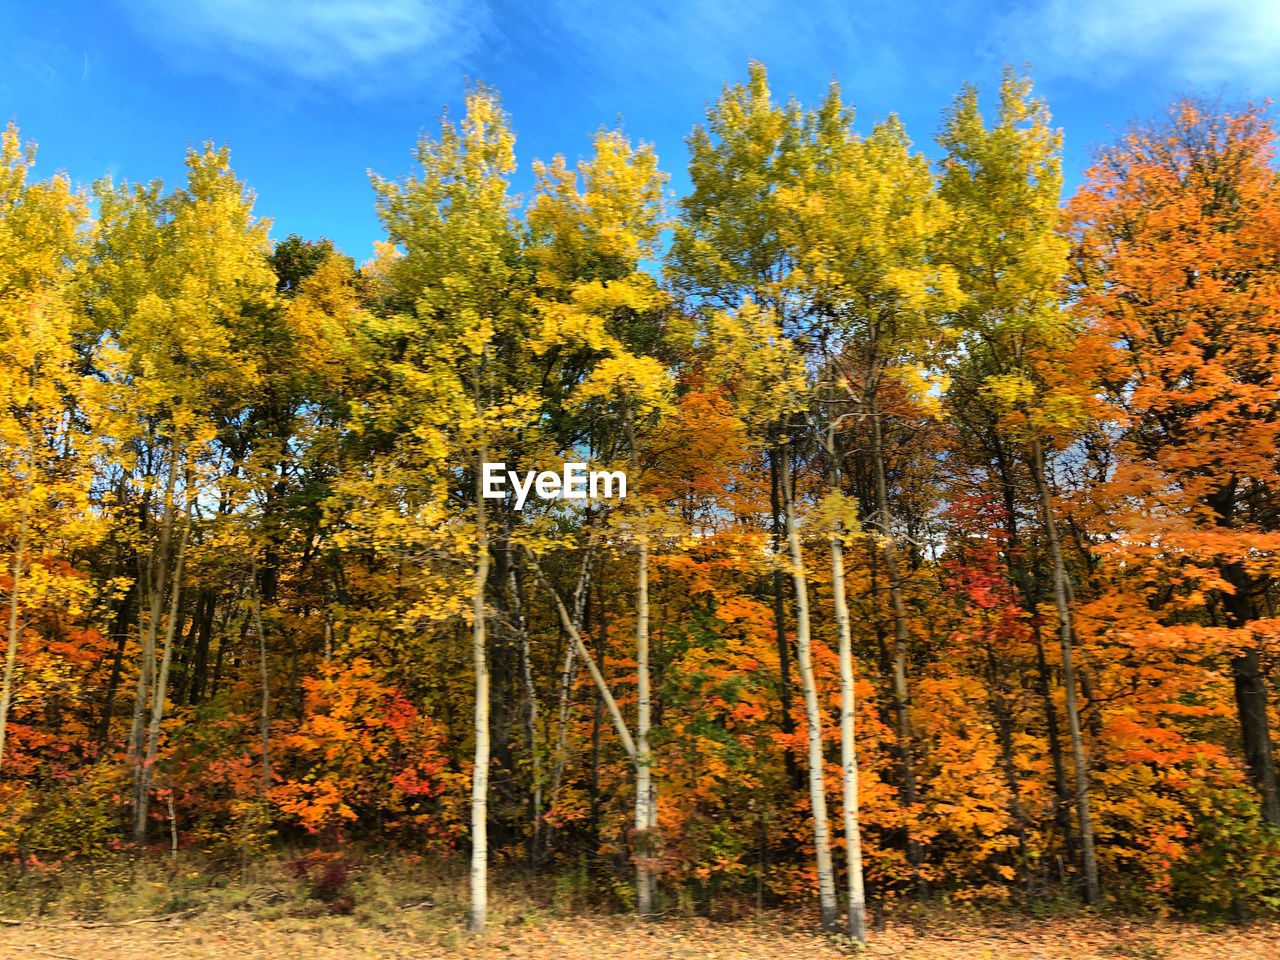 AUTUMN TREES IN FOREST